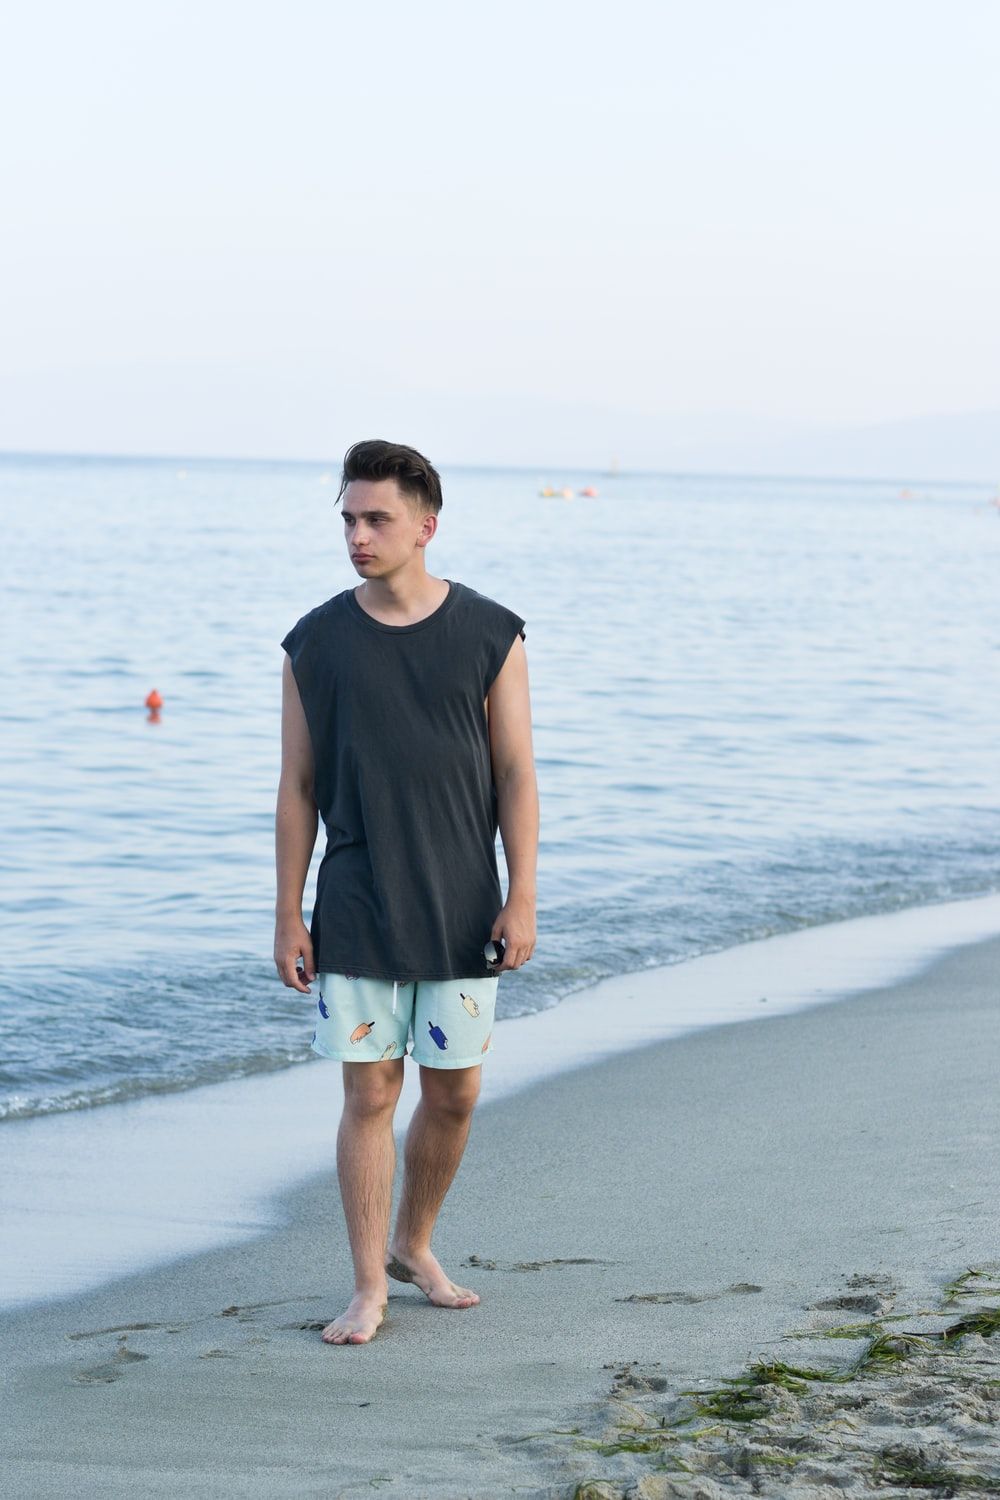 Beach Boy Picture. Download Free Image